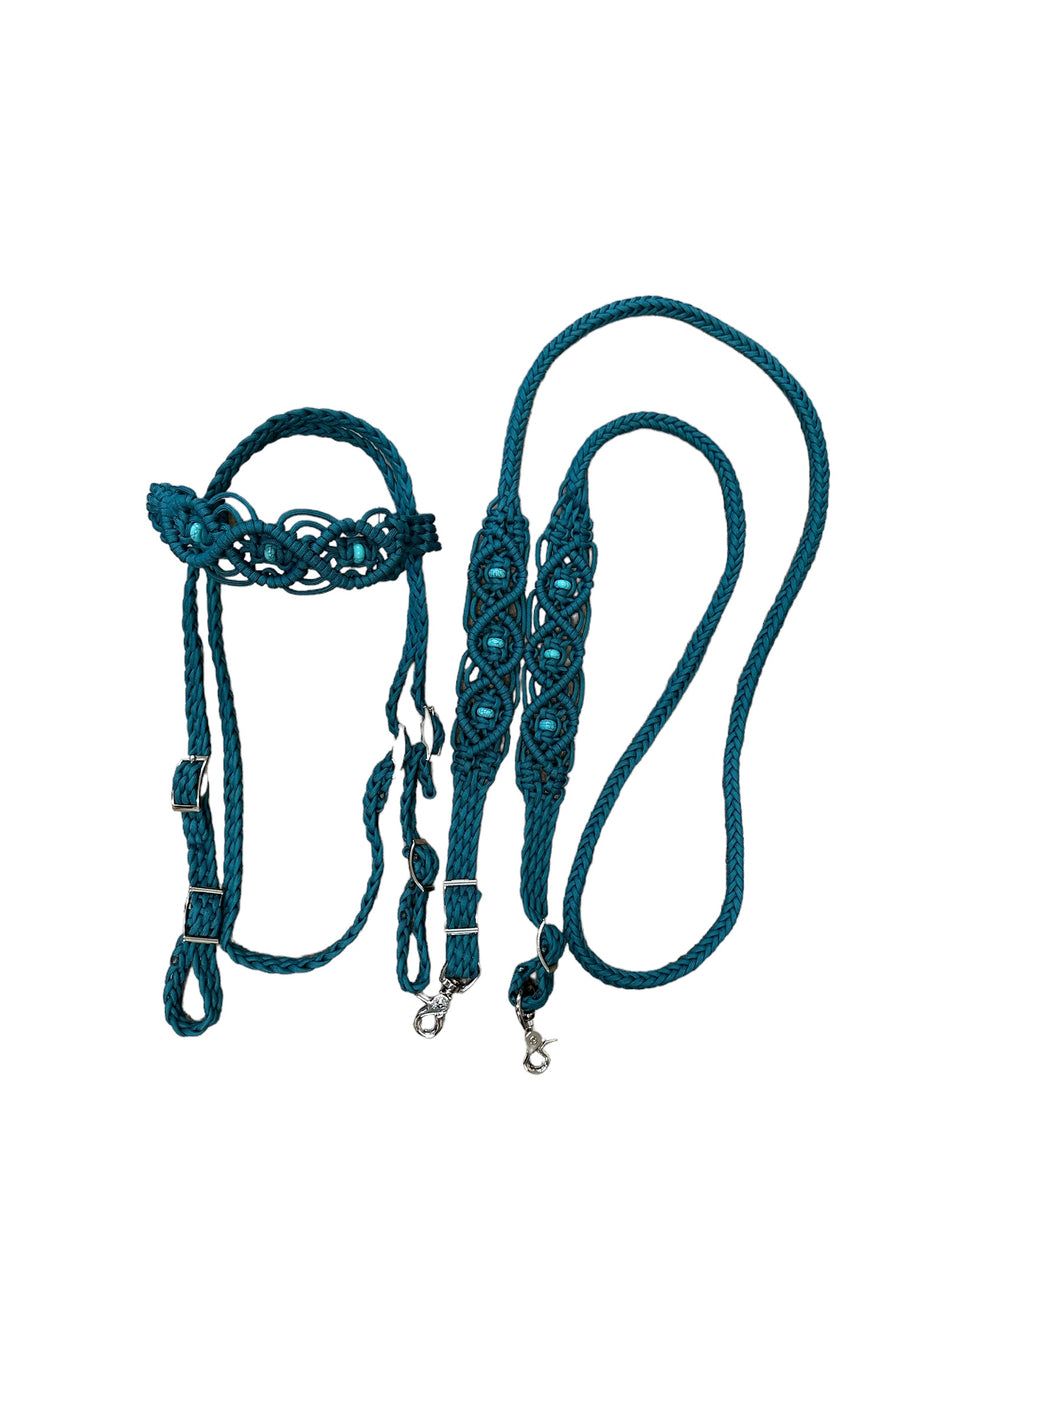 Teal Beaded Browband Headstall with a fancy braided browband with matching reins....all sizes.